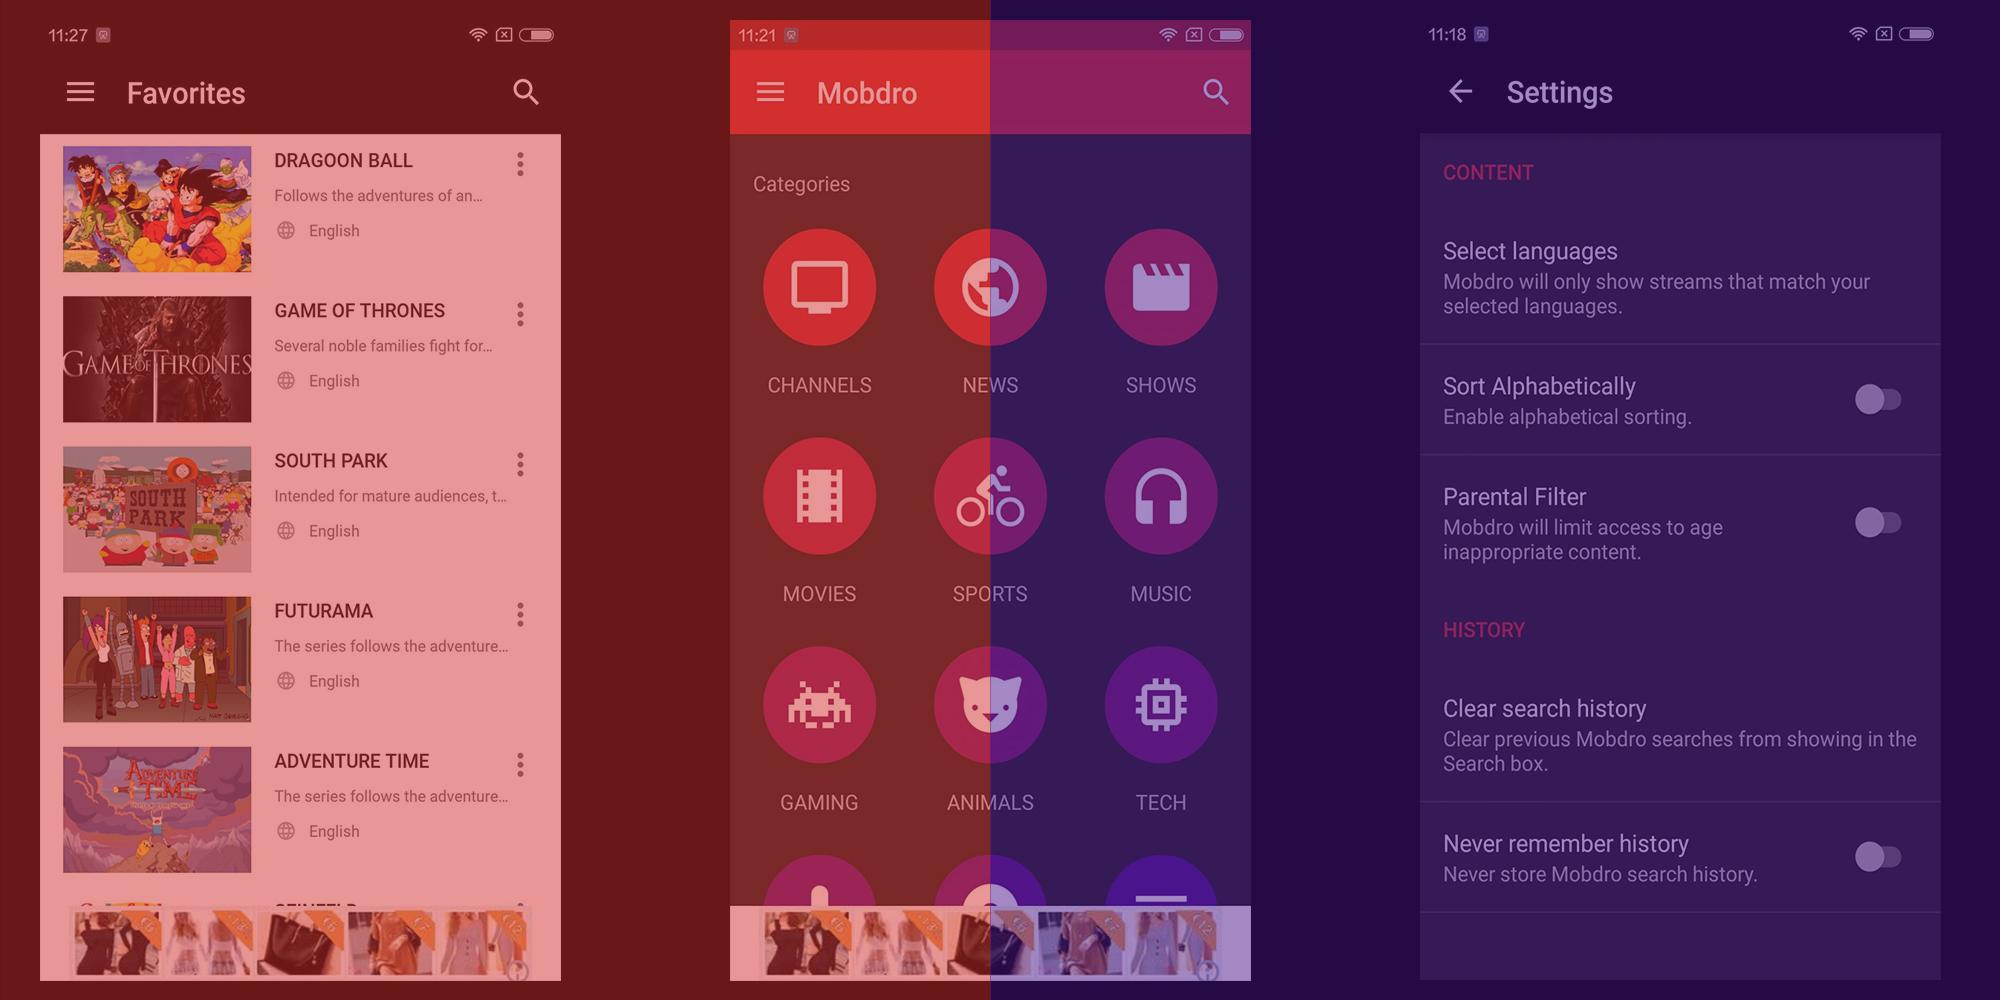 Mobdro Premium for Android - APK Download